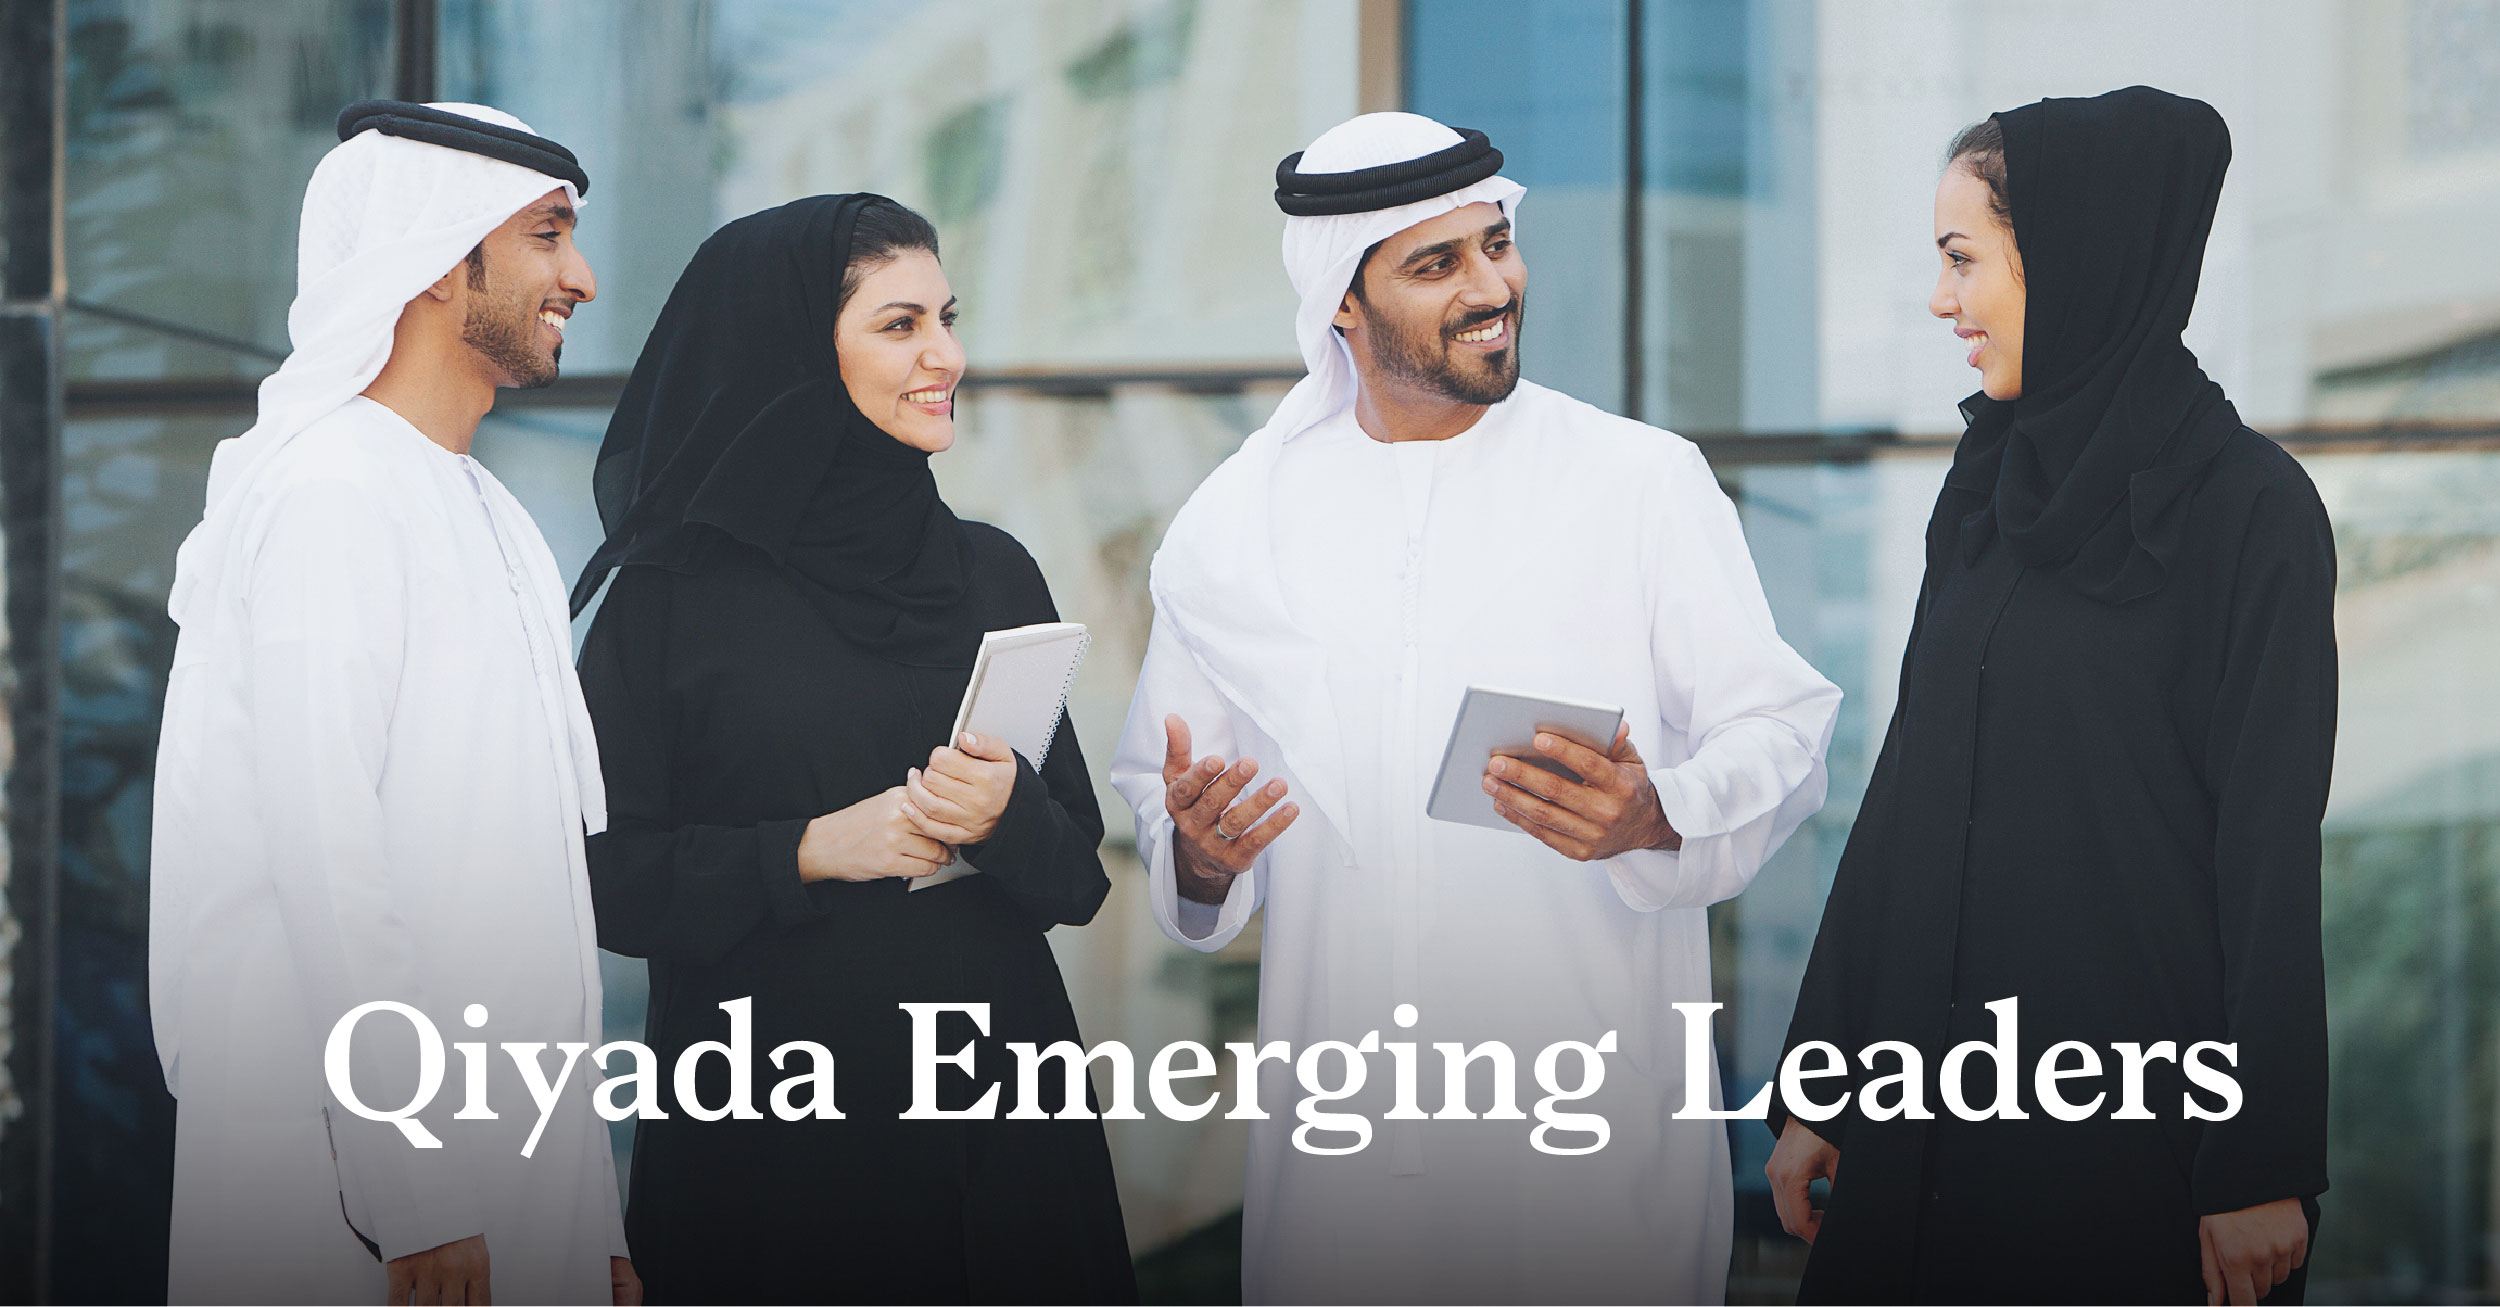 McKinsey & Company Launches Qiyada Emerging Leaders Program For Abu Dhabi Young Professionals